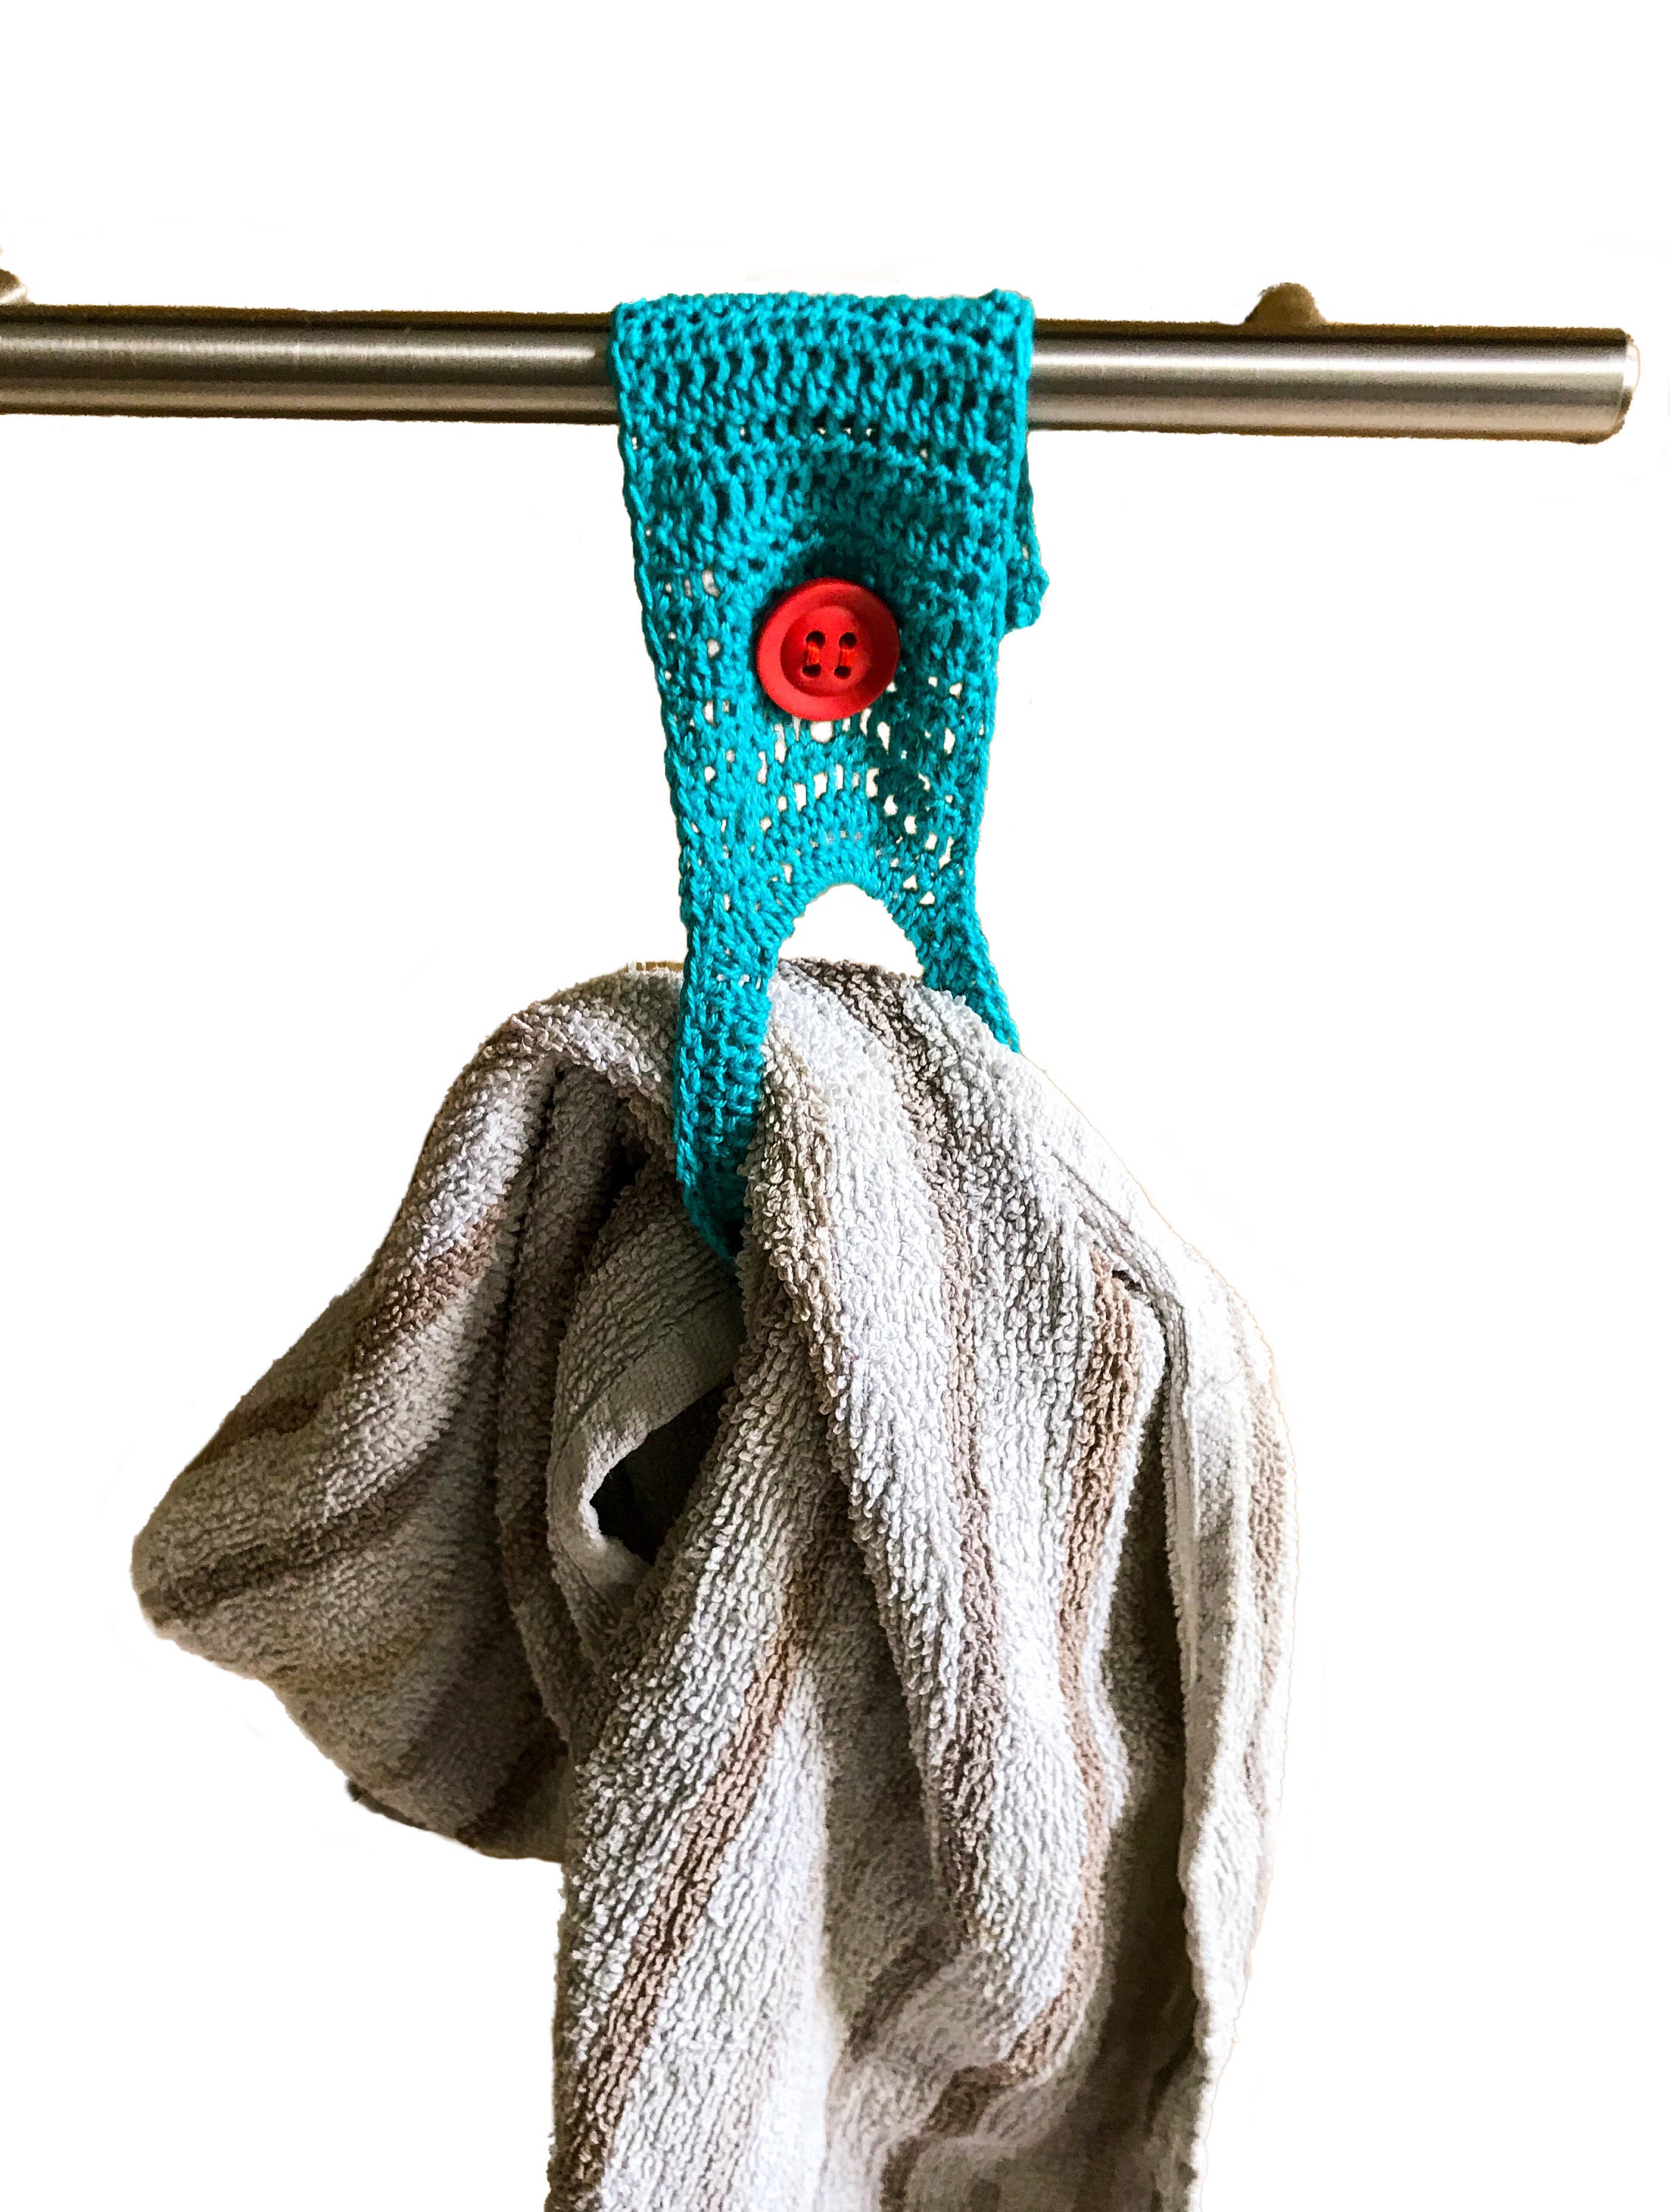 BEST MOM EVER Kitchen/dish towels with crochet towel ring holder (3pcs  set)